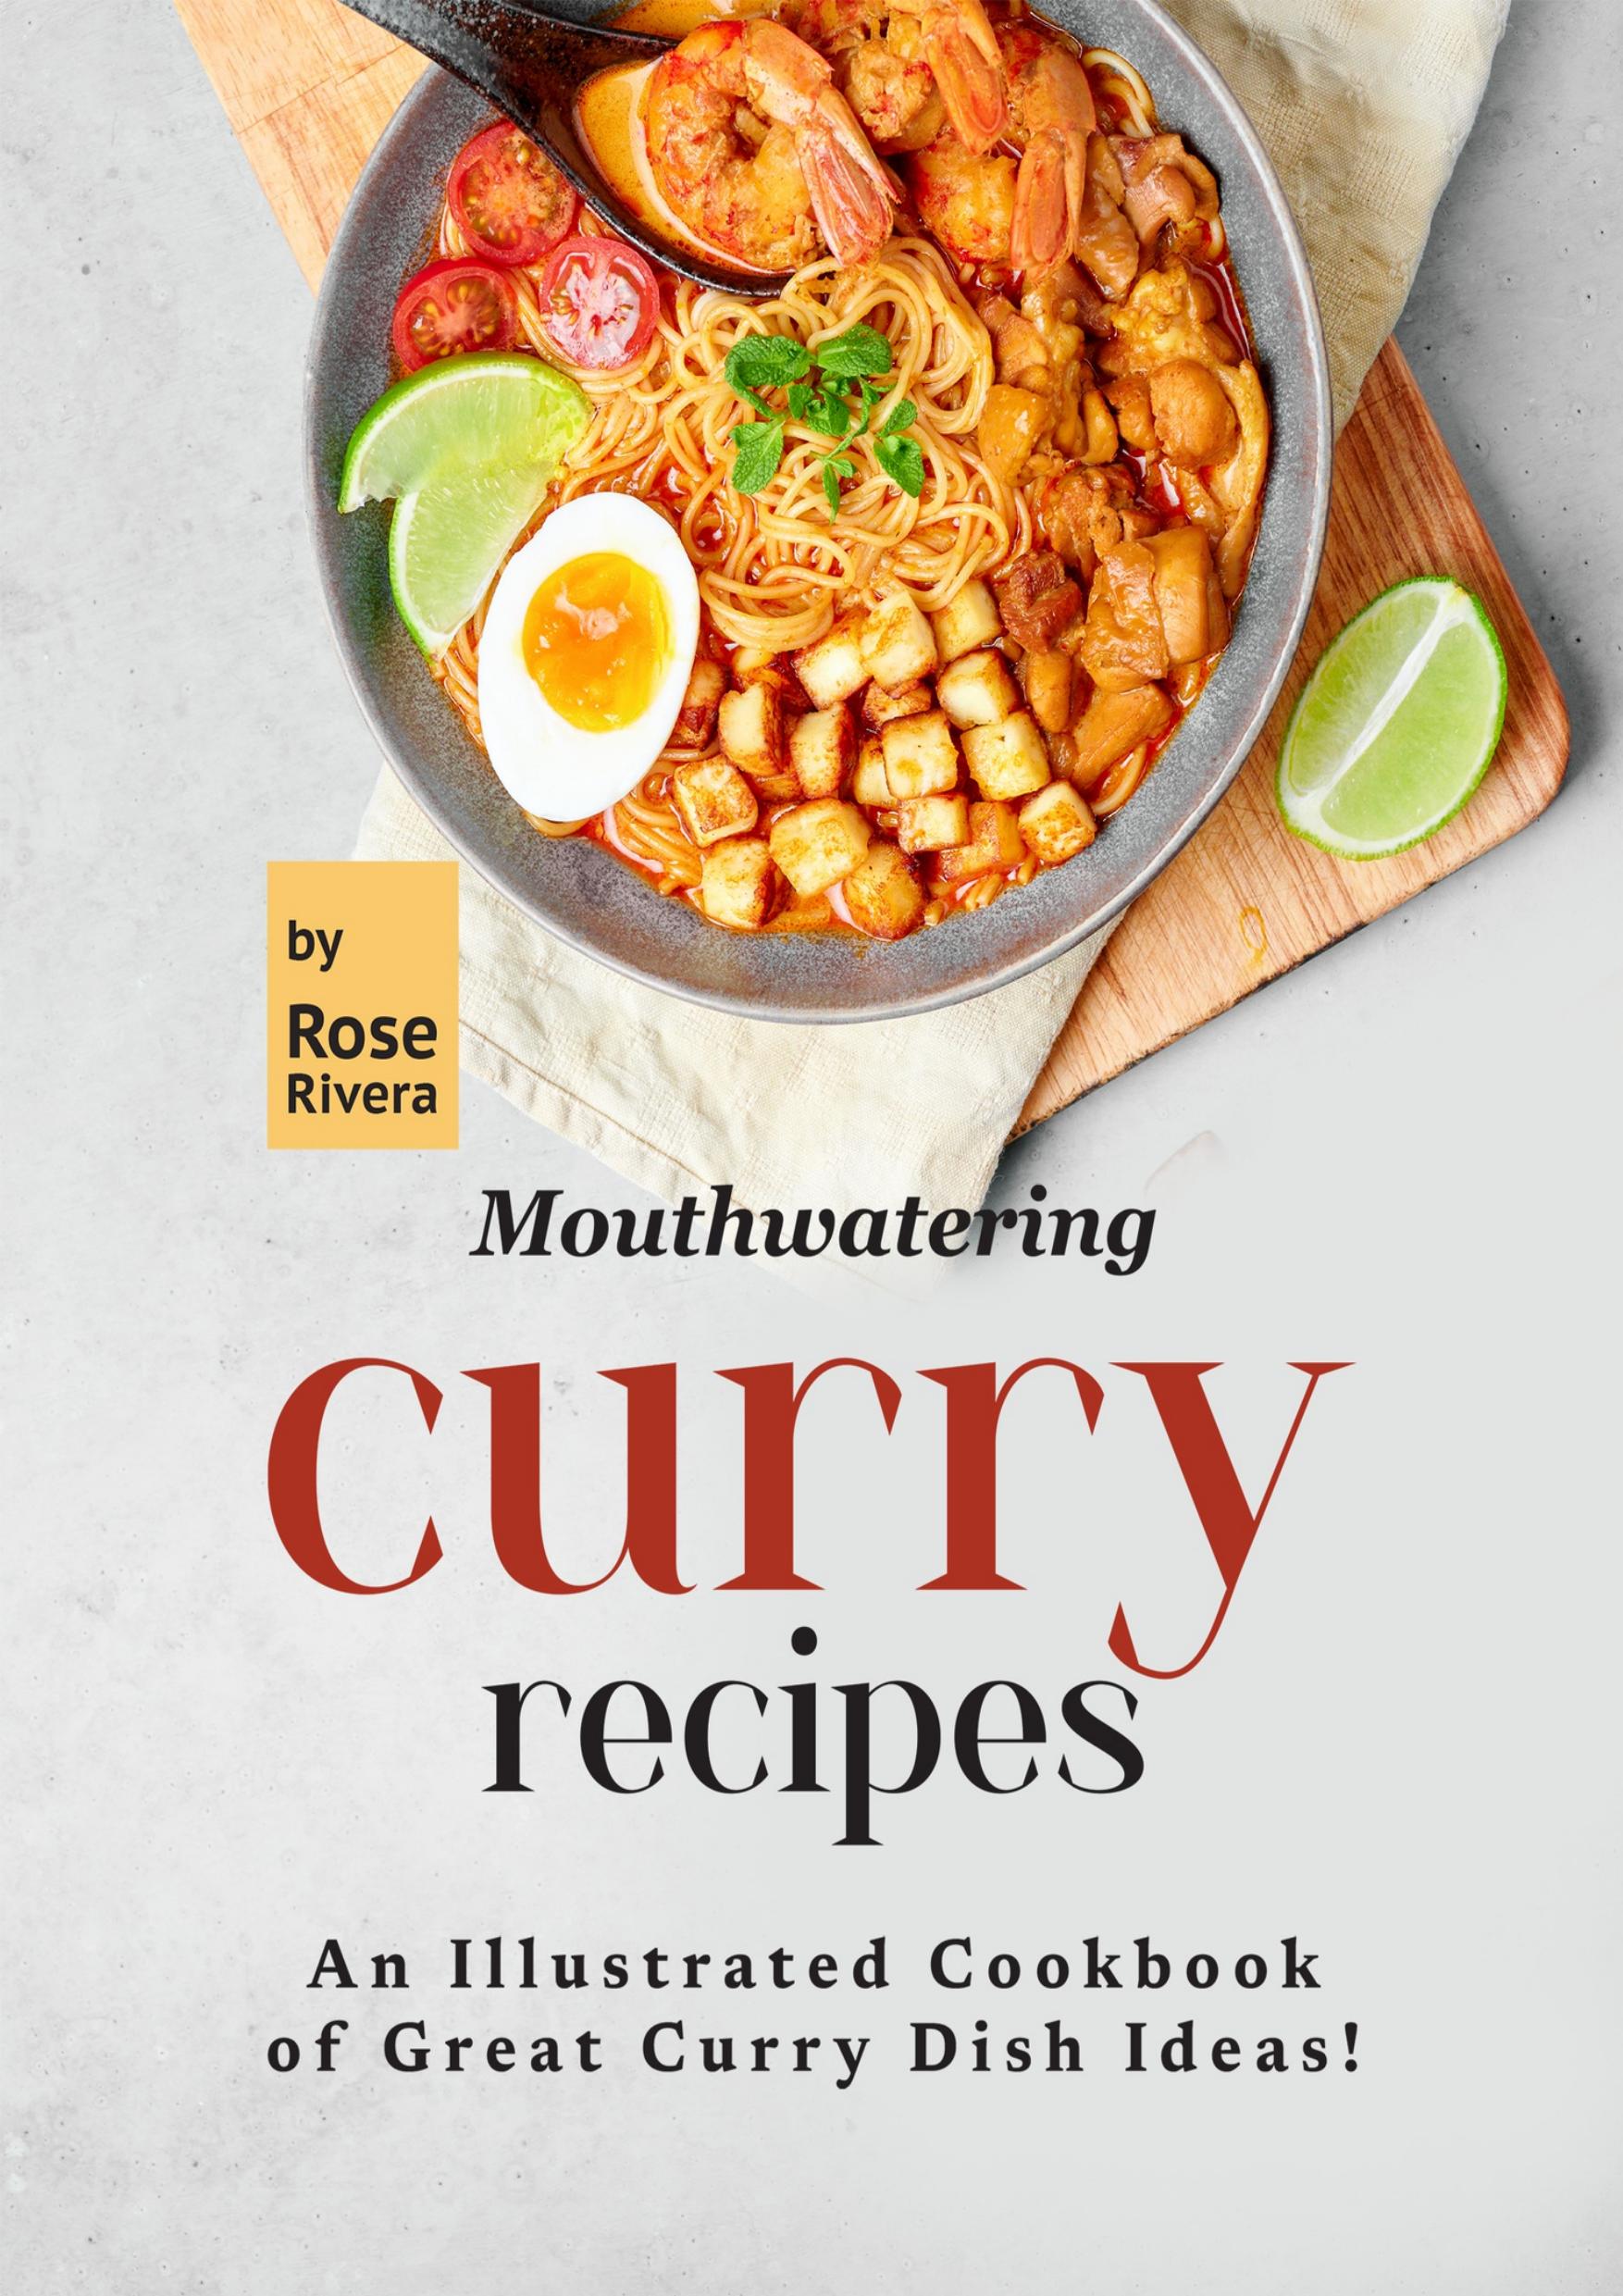 Mouthwatering Curry Recipes: An Illustrated Cookbook of Great Curry Dish Ideas! by Rivera Rose